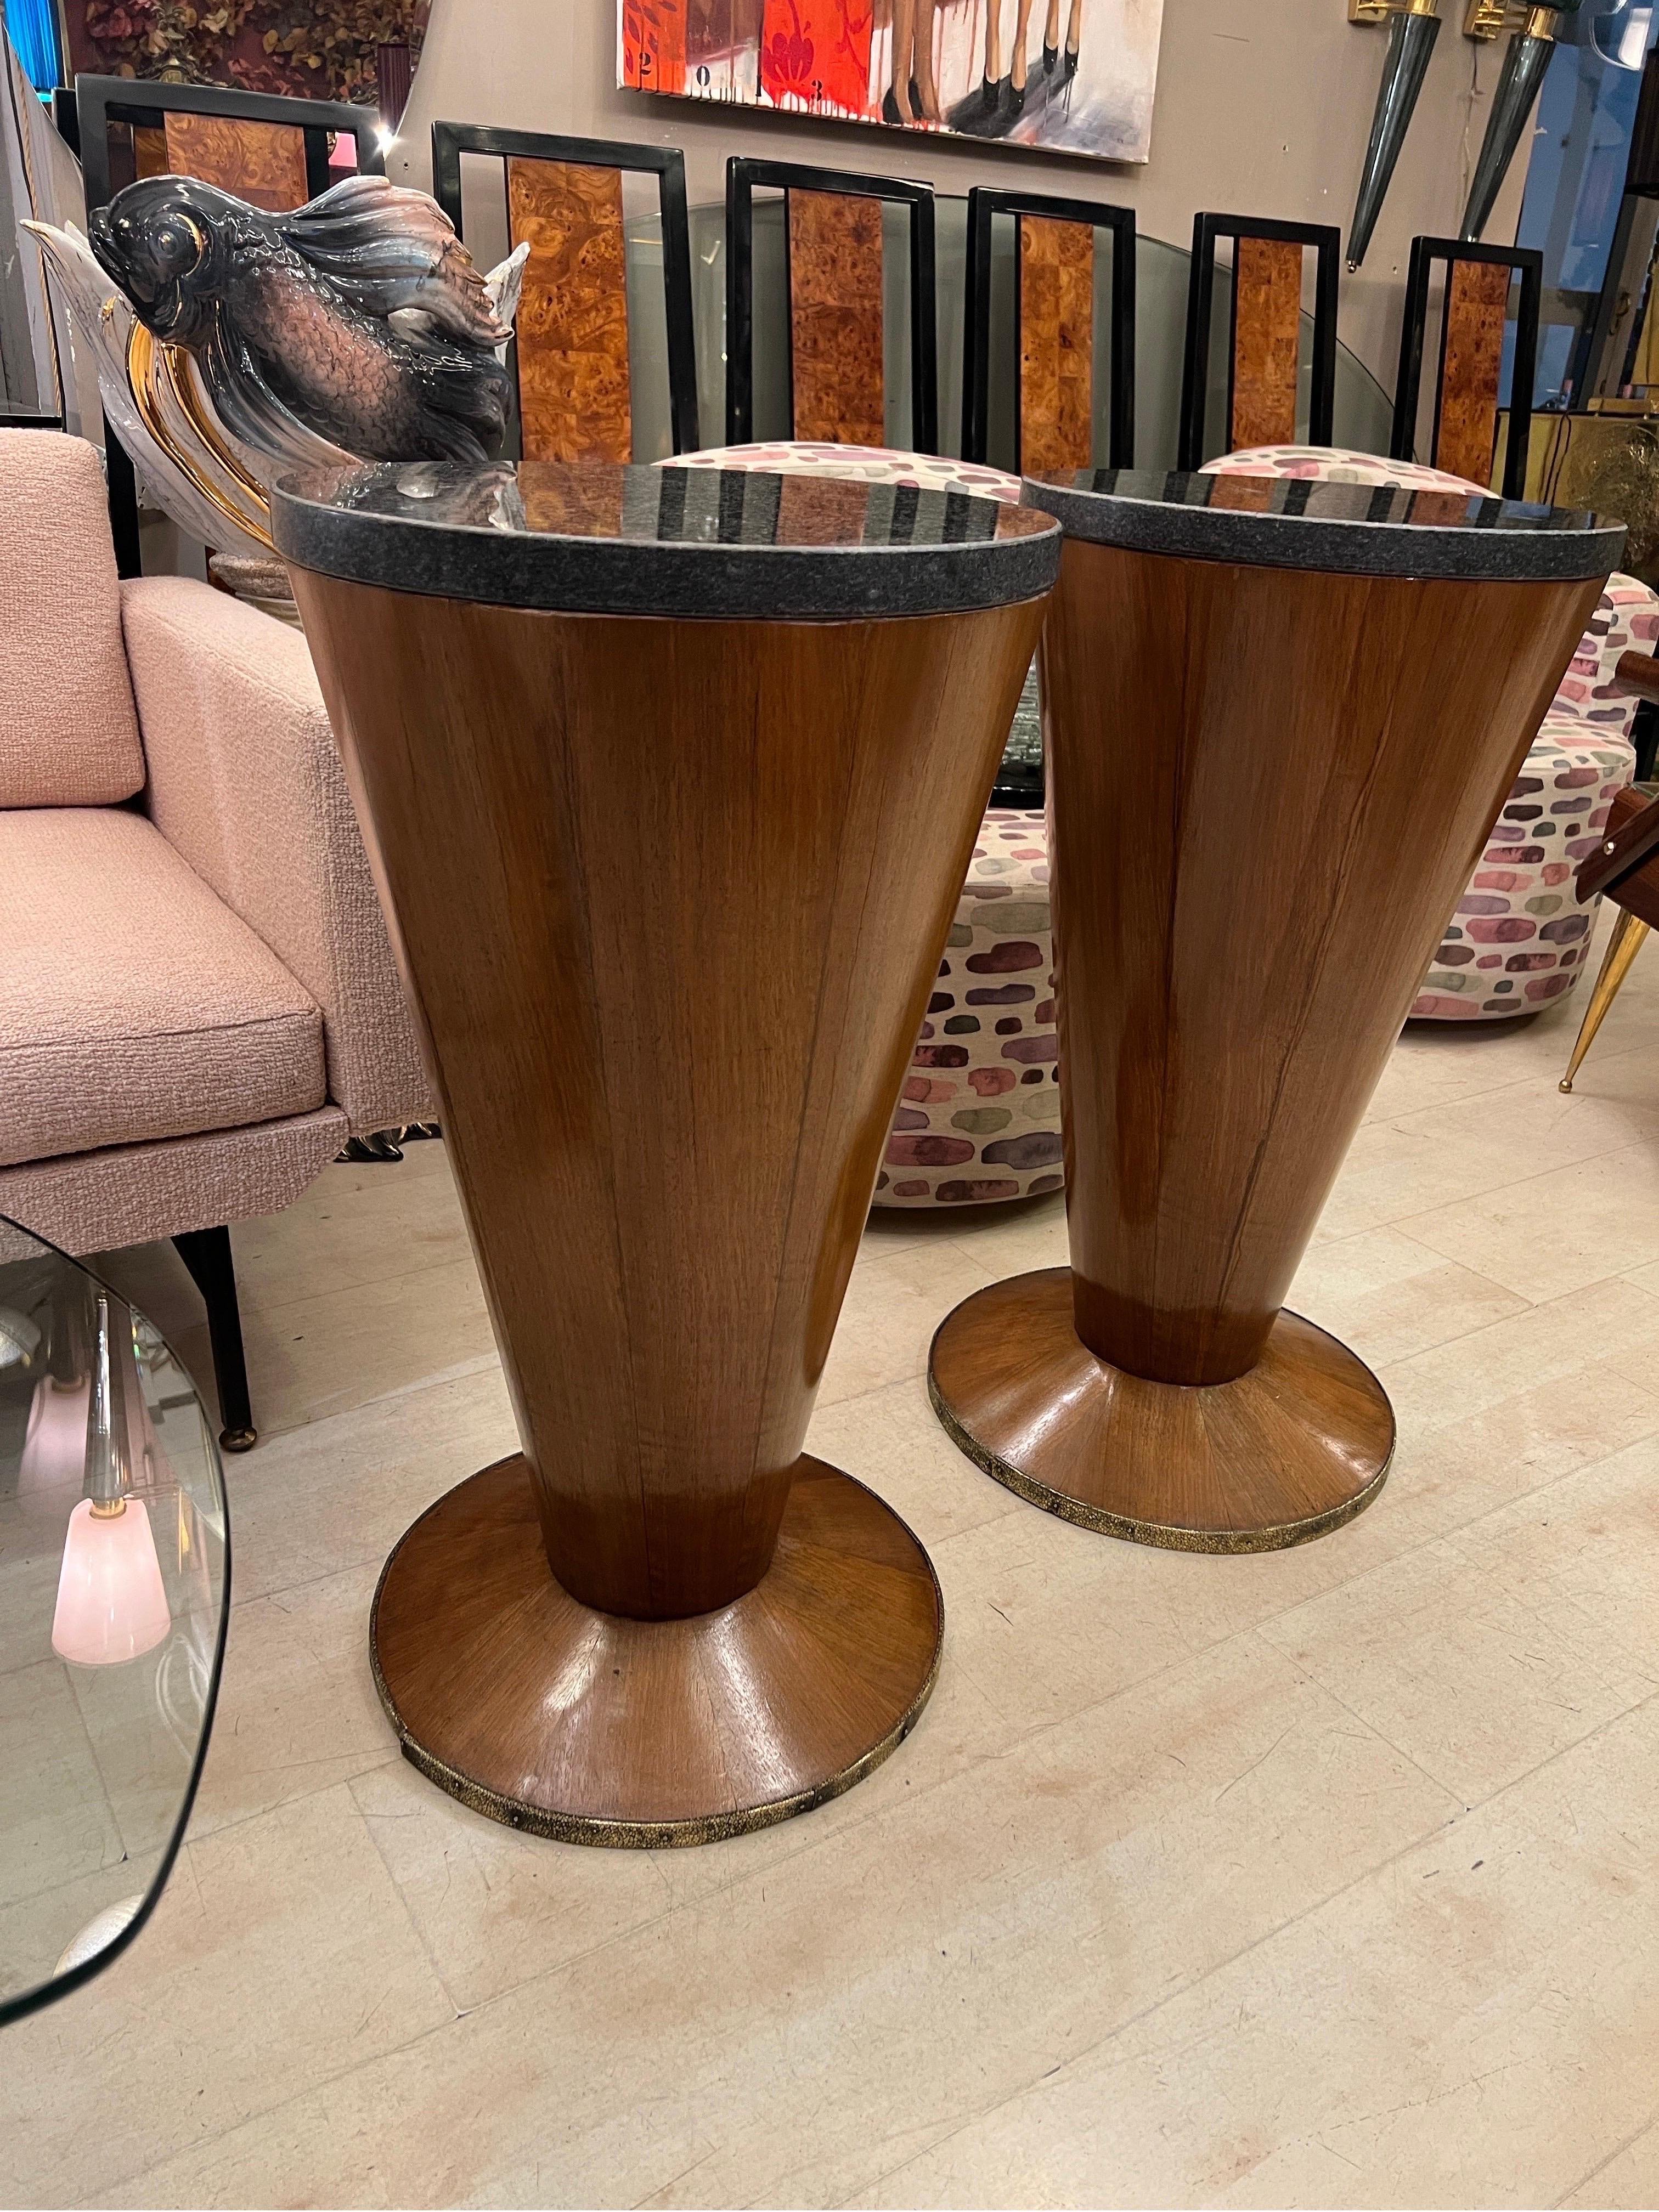 Pair of Art Deco Conical Cherry Wood Side Tables with Marble Top 1940s For Sale 5